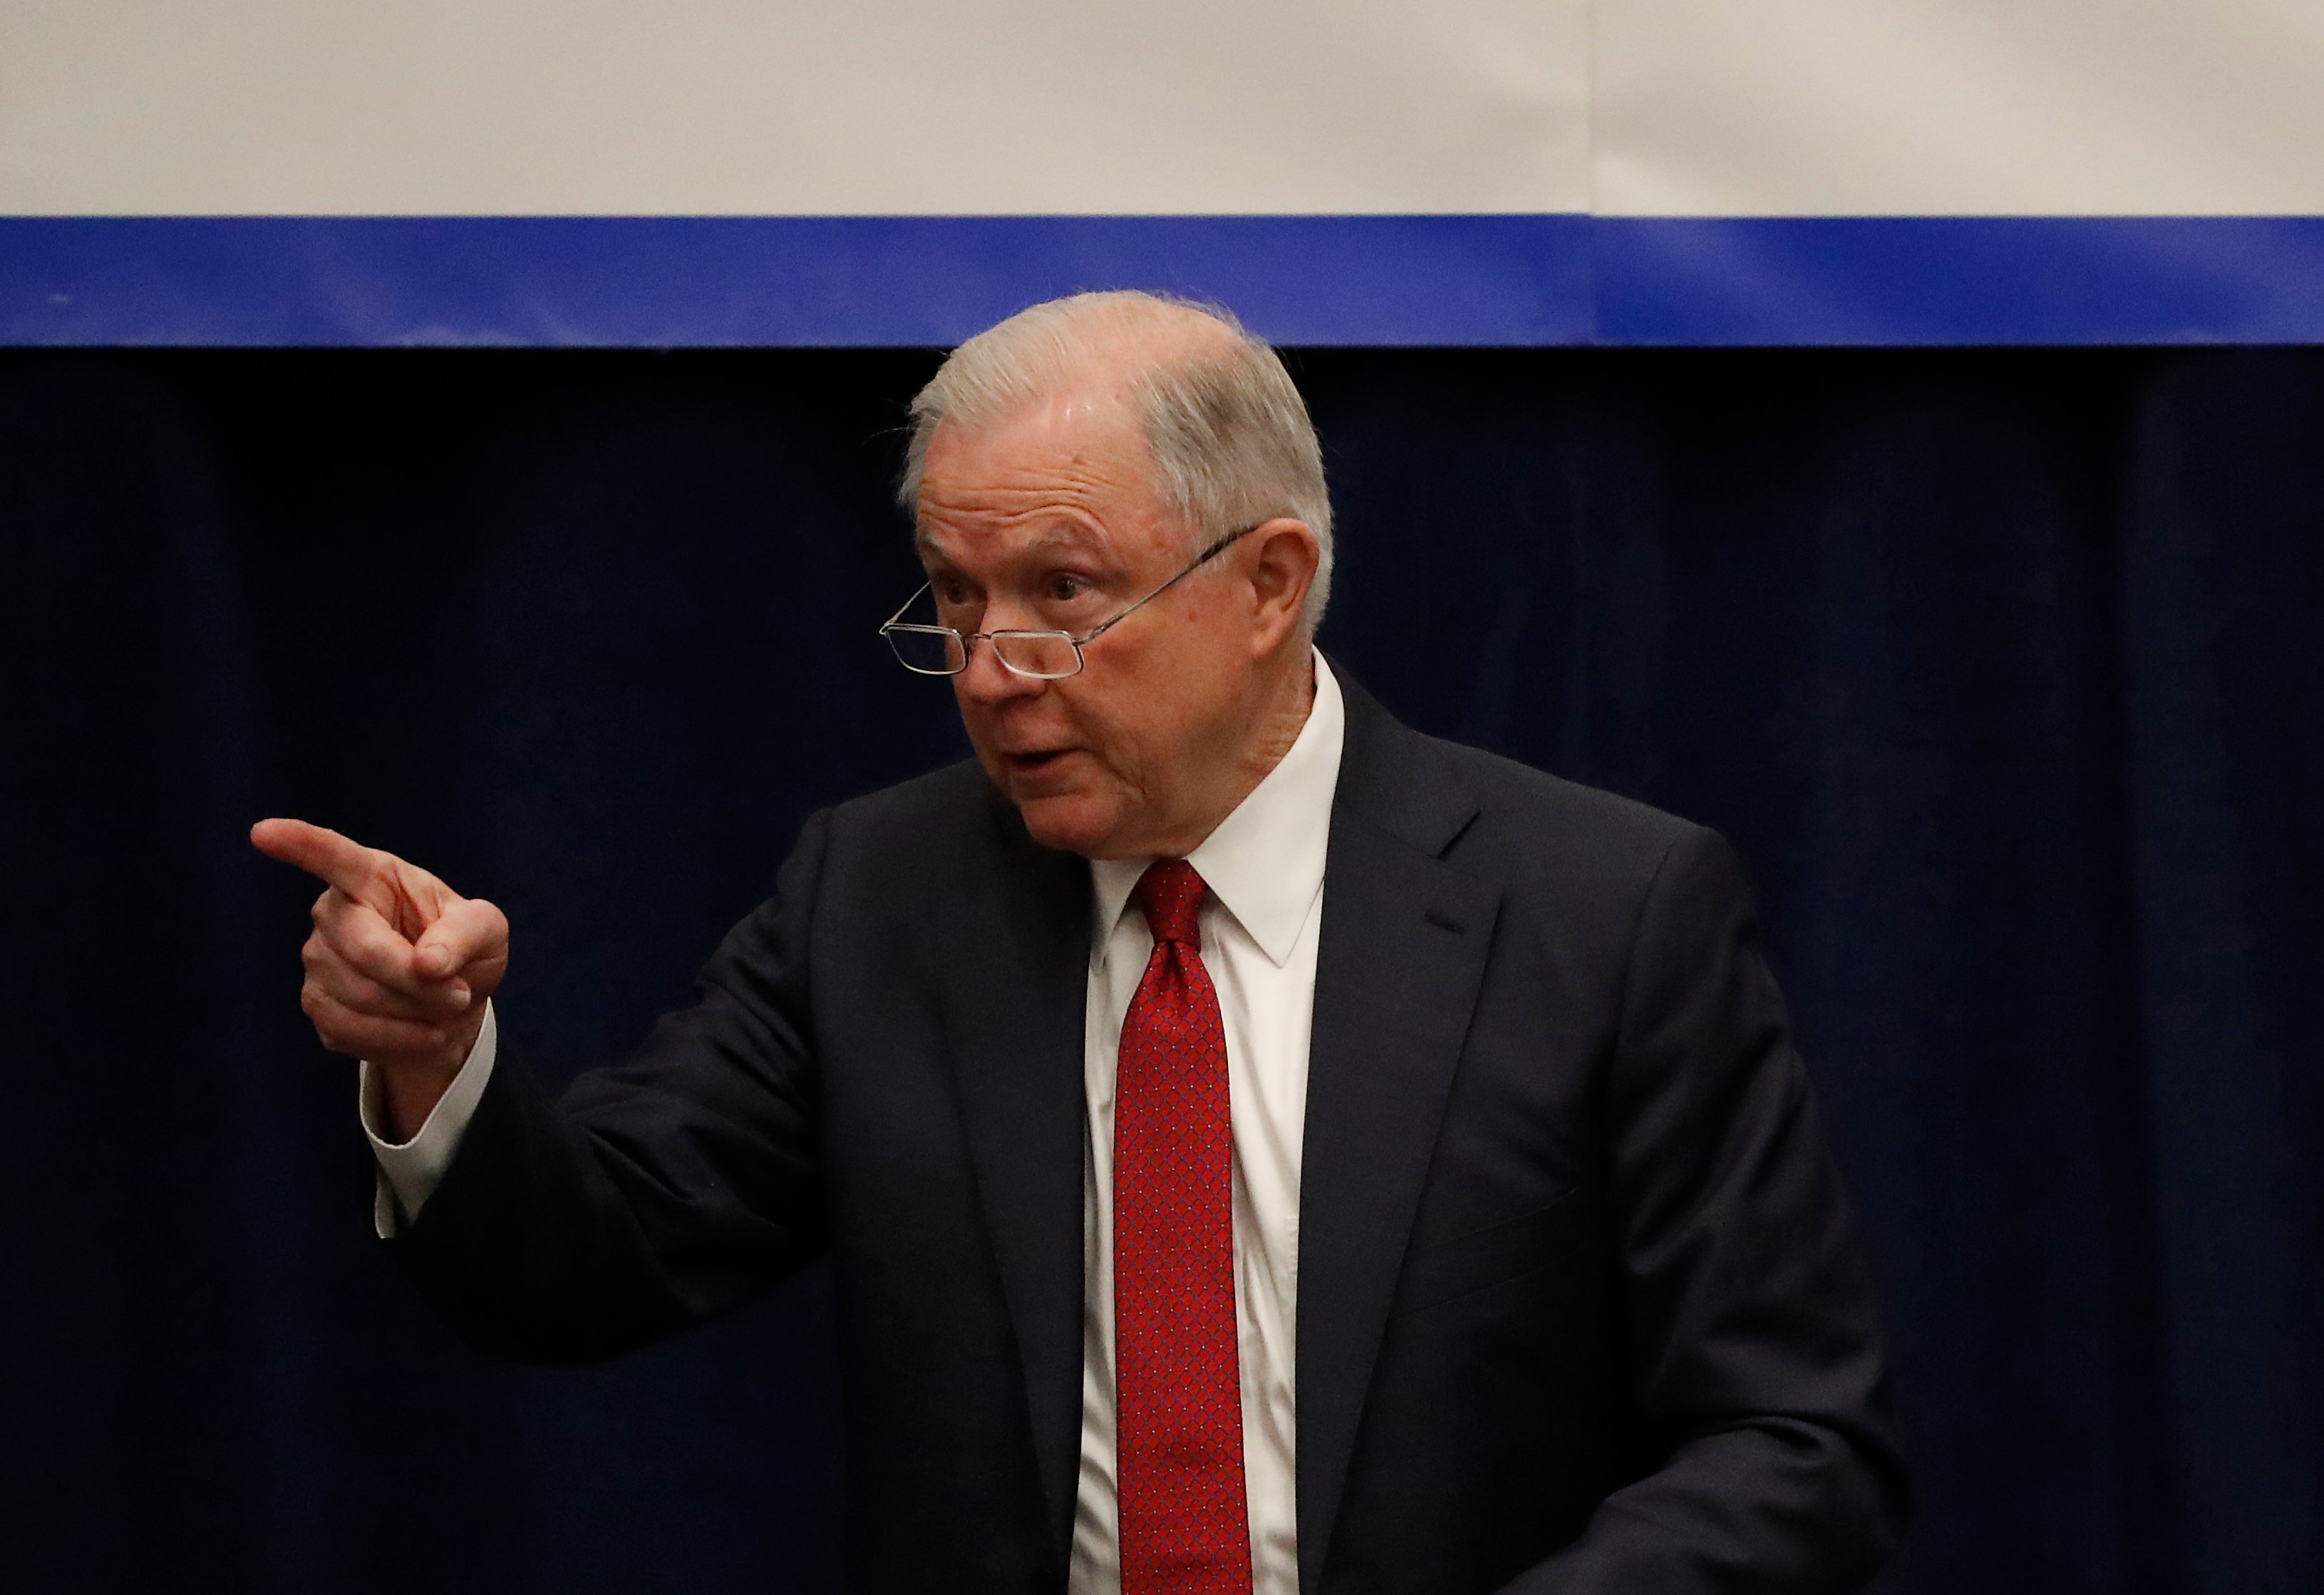 SACRAMENTO, CA - MARCH 07: Attorney General Jeff Sessions gestures as he speaks at the California Peace Officers' Association 26th Annual Law Enforcement Legislative Day on March 7, 2018 in Sacramento, California. The attorney general is expected to reveal a major sanctuary jurisdiction announcement as the Justice Department sued California over its sanctuary policies. (Photo by Stephen Lam/Getty Images)